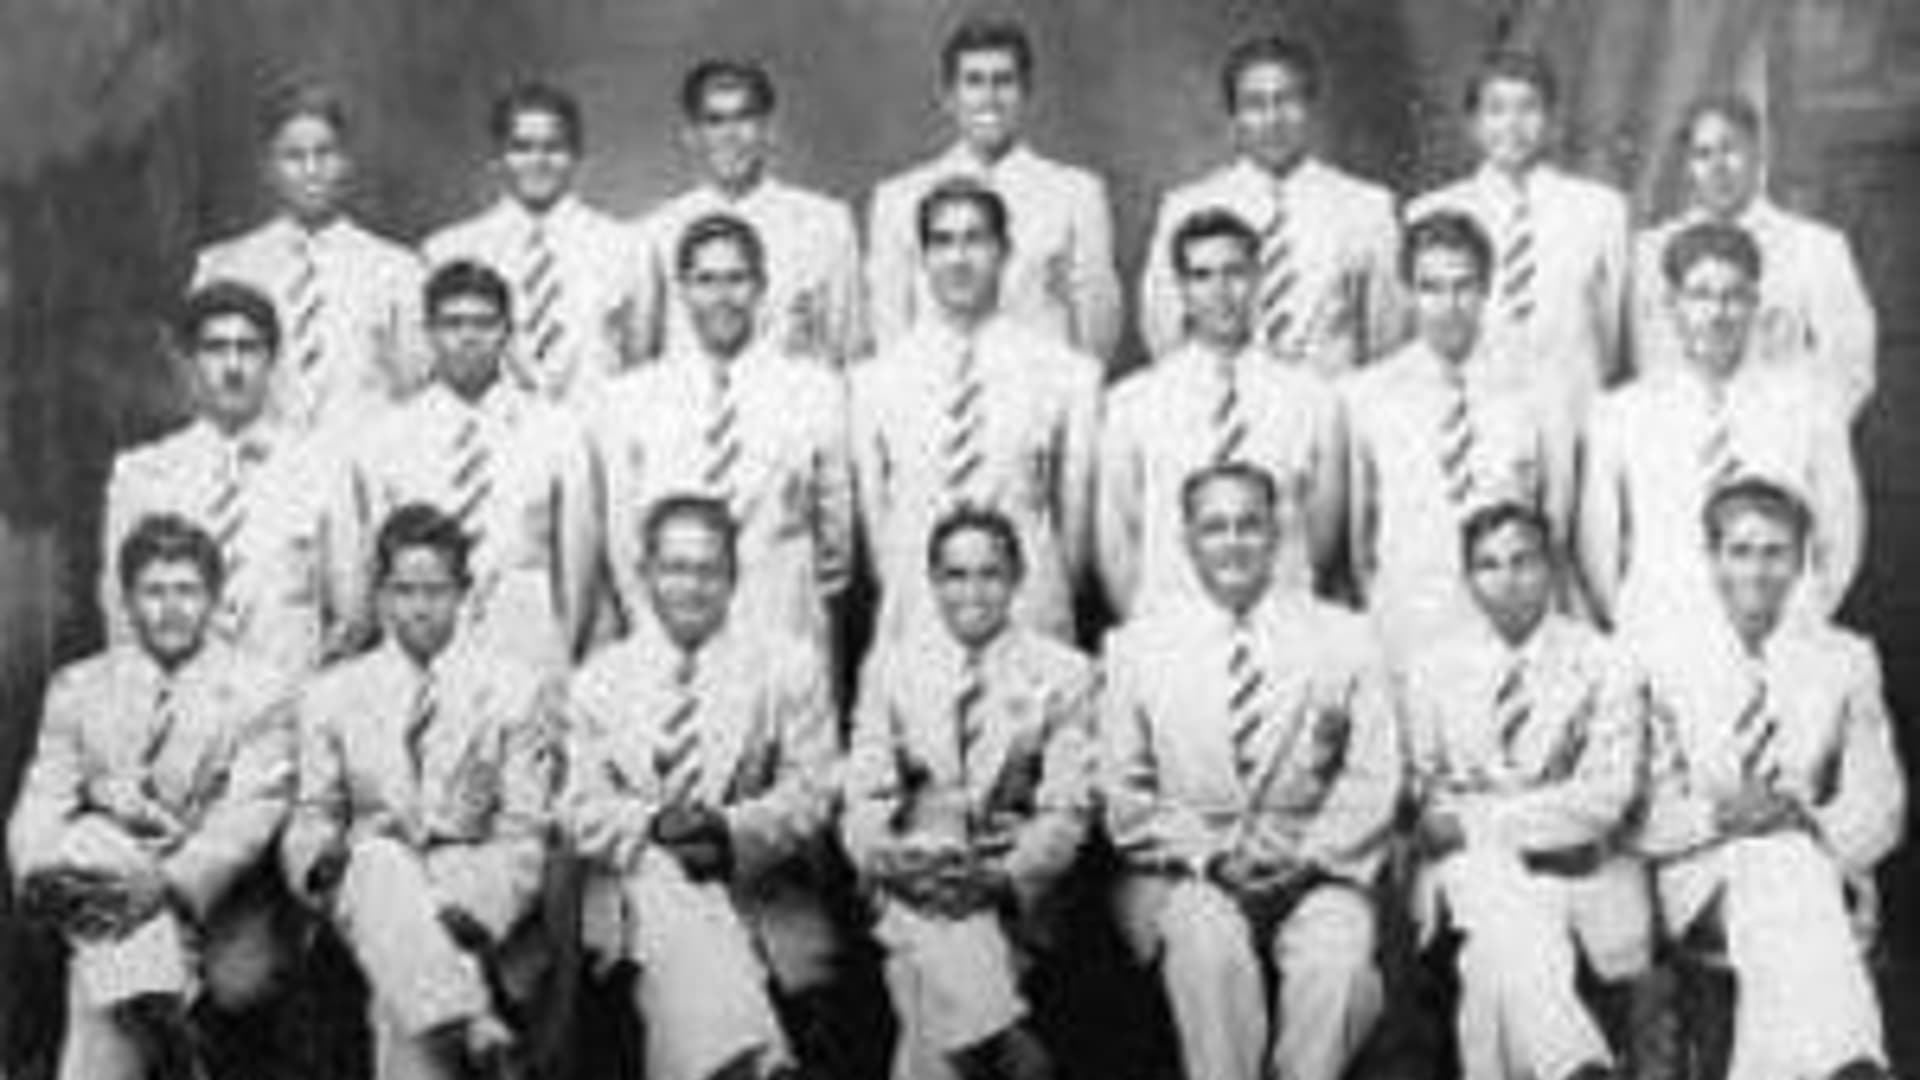 Olympics: Know your team - Heroes of Indian hockey who scripted history in  Tokyo